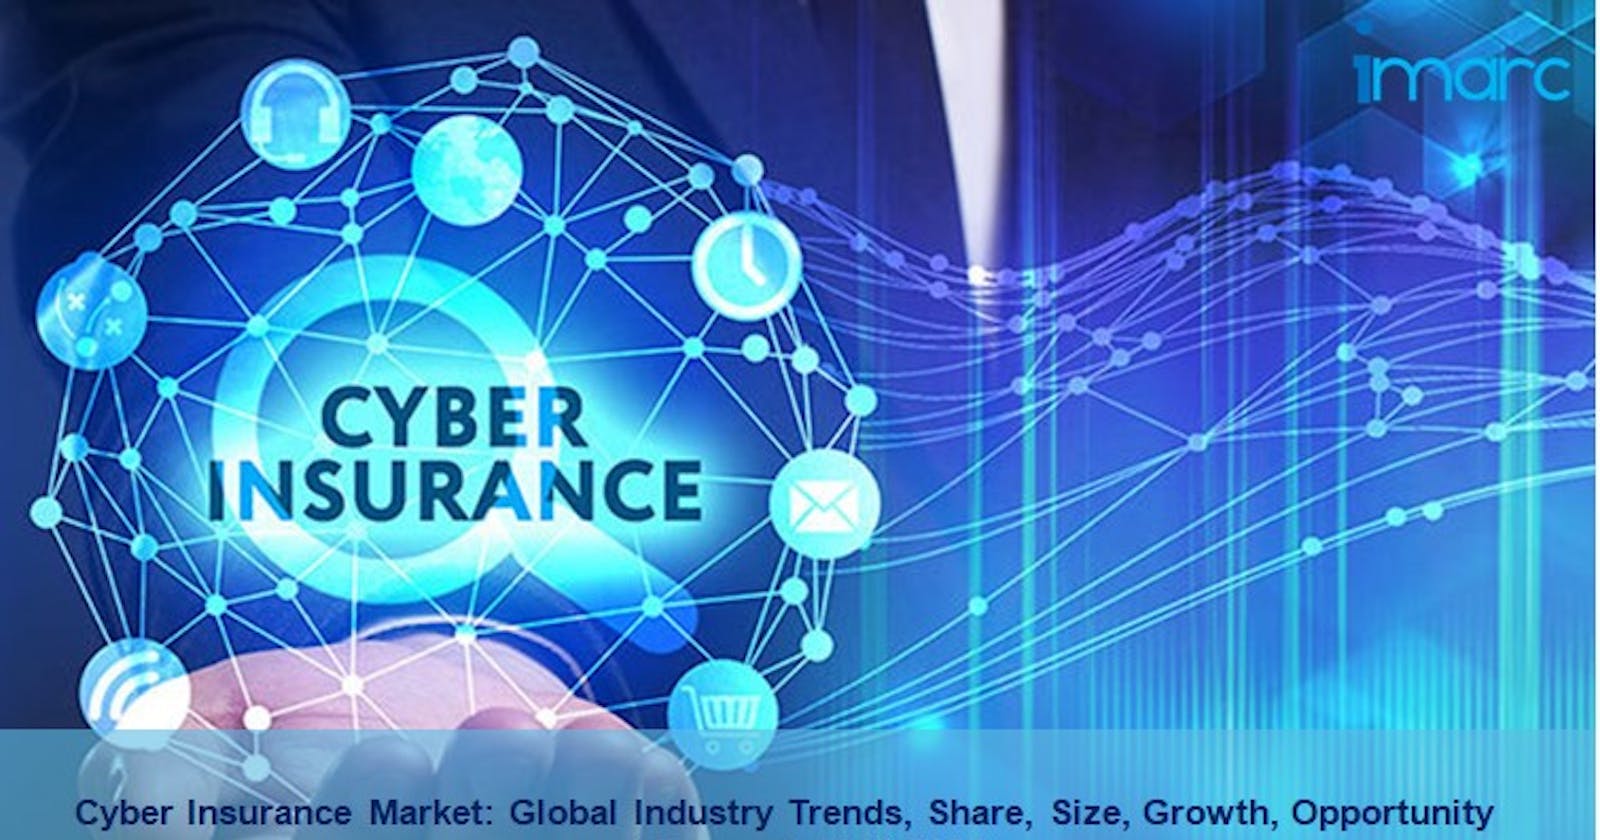 Cyber Insurance Market Trends, Share, Demand, Scope and Analysis 2022-2027